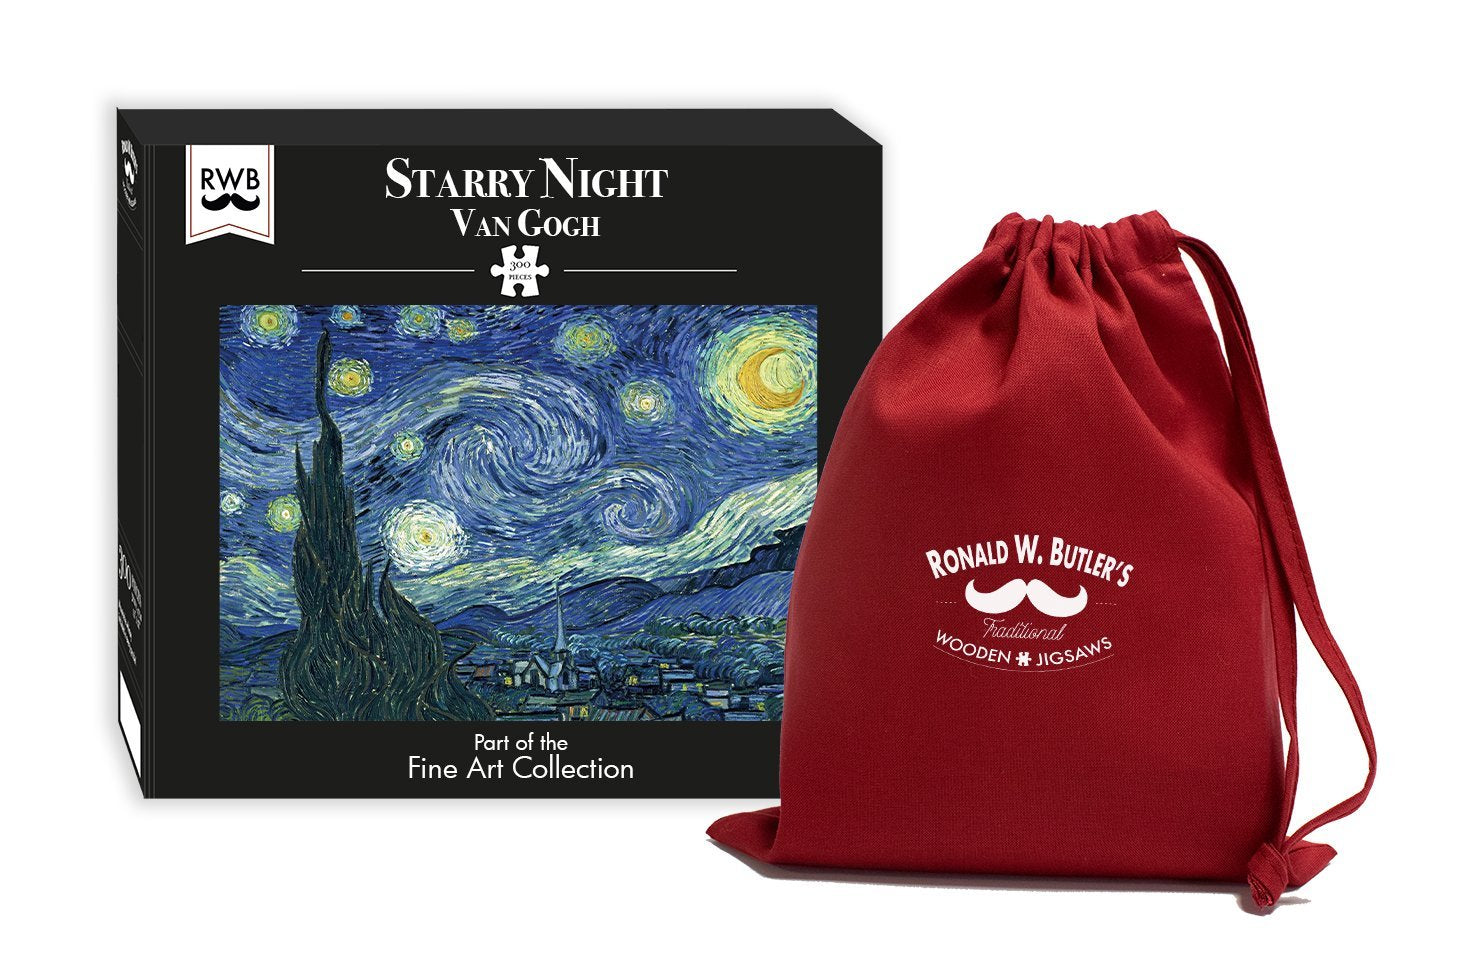 Starry Night by Vincent van Gogh 300 Piece Wooden Jigsaw Puzzle